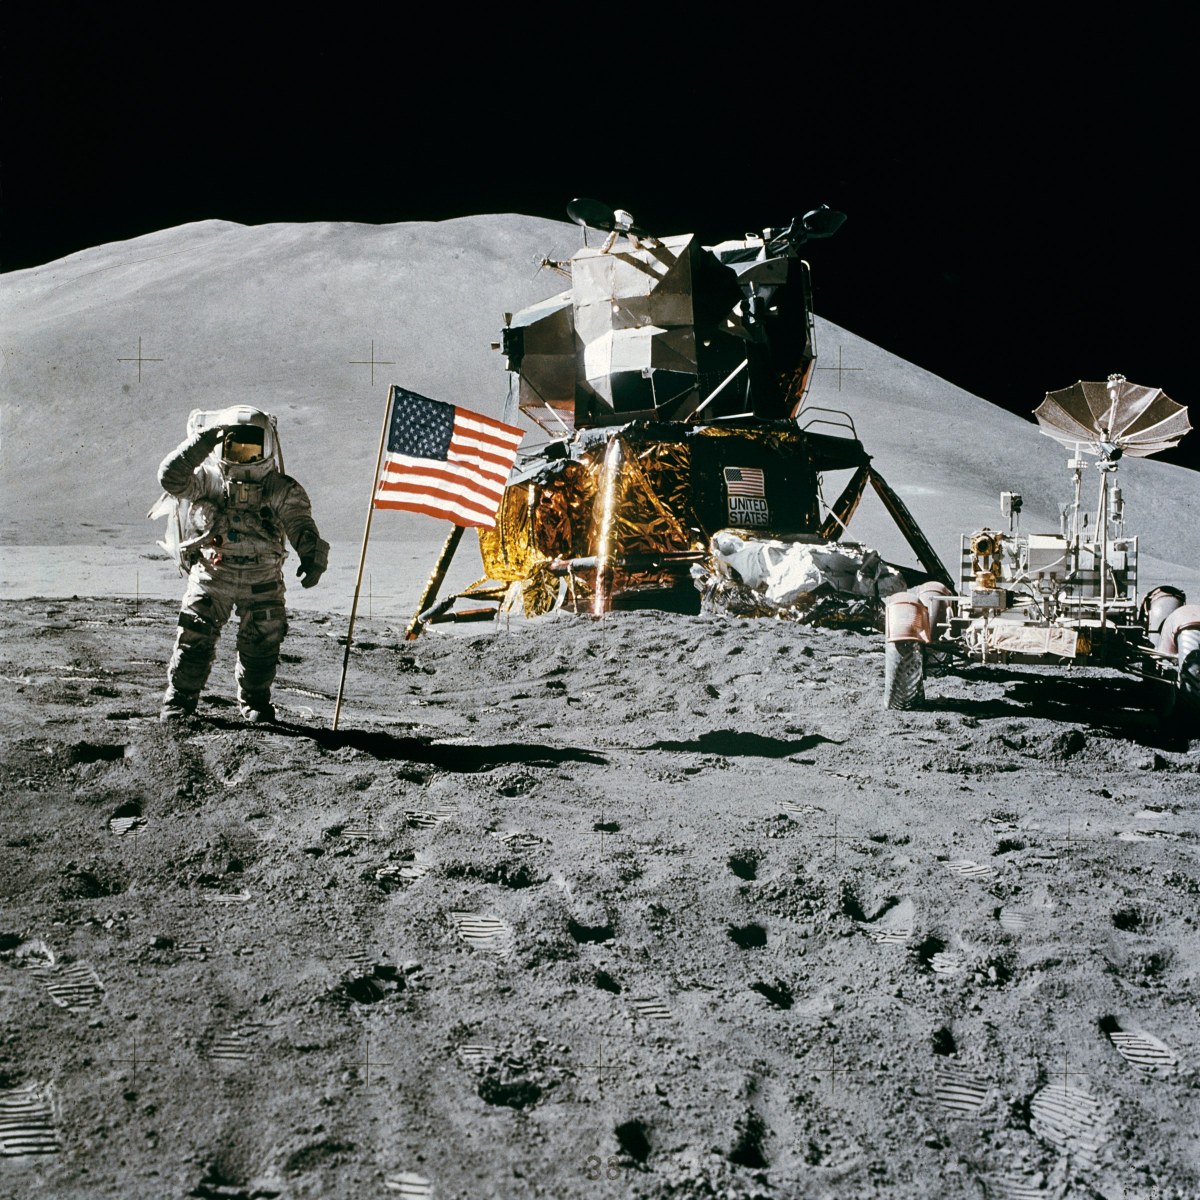  Apollo 15 Lunar Module Pilot James Irwin salutes the U.S. flag. Astronaut James B. Irwin, lunar module pilot, gives a military salute while standing beside the deployed U.S. flag during the Apollo 15 lunar surface extravehicular activity (EVA) at the...